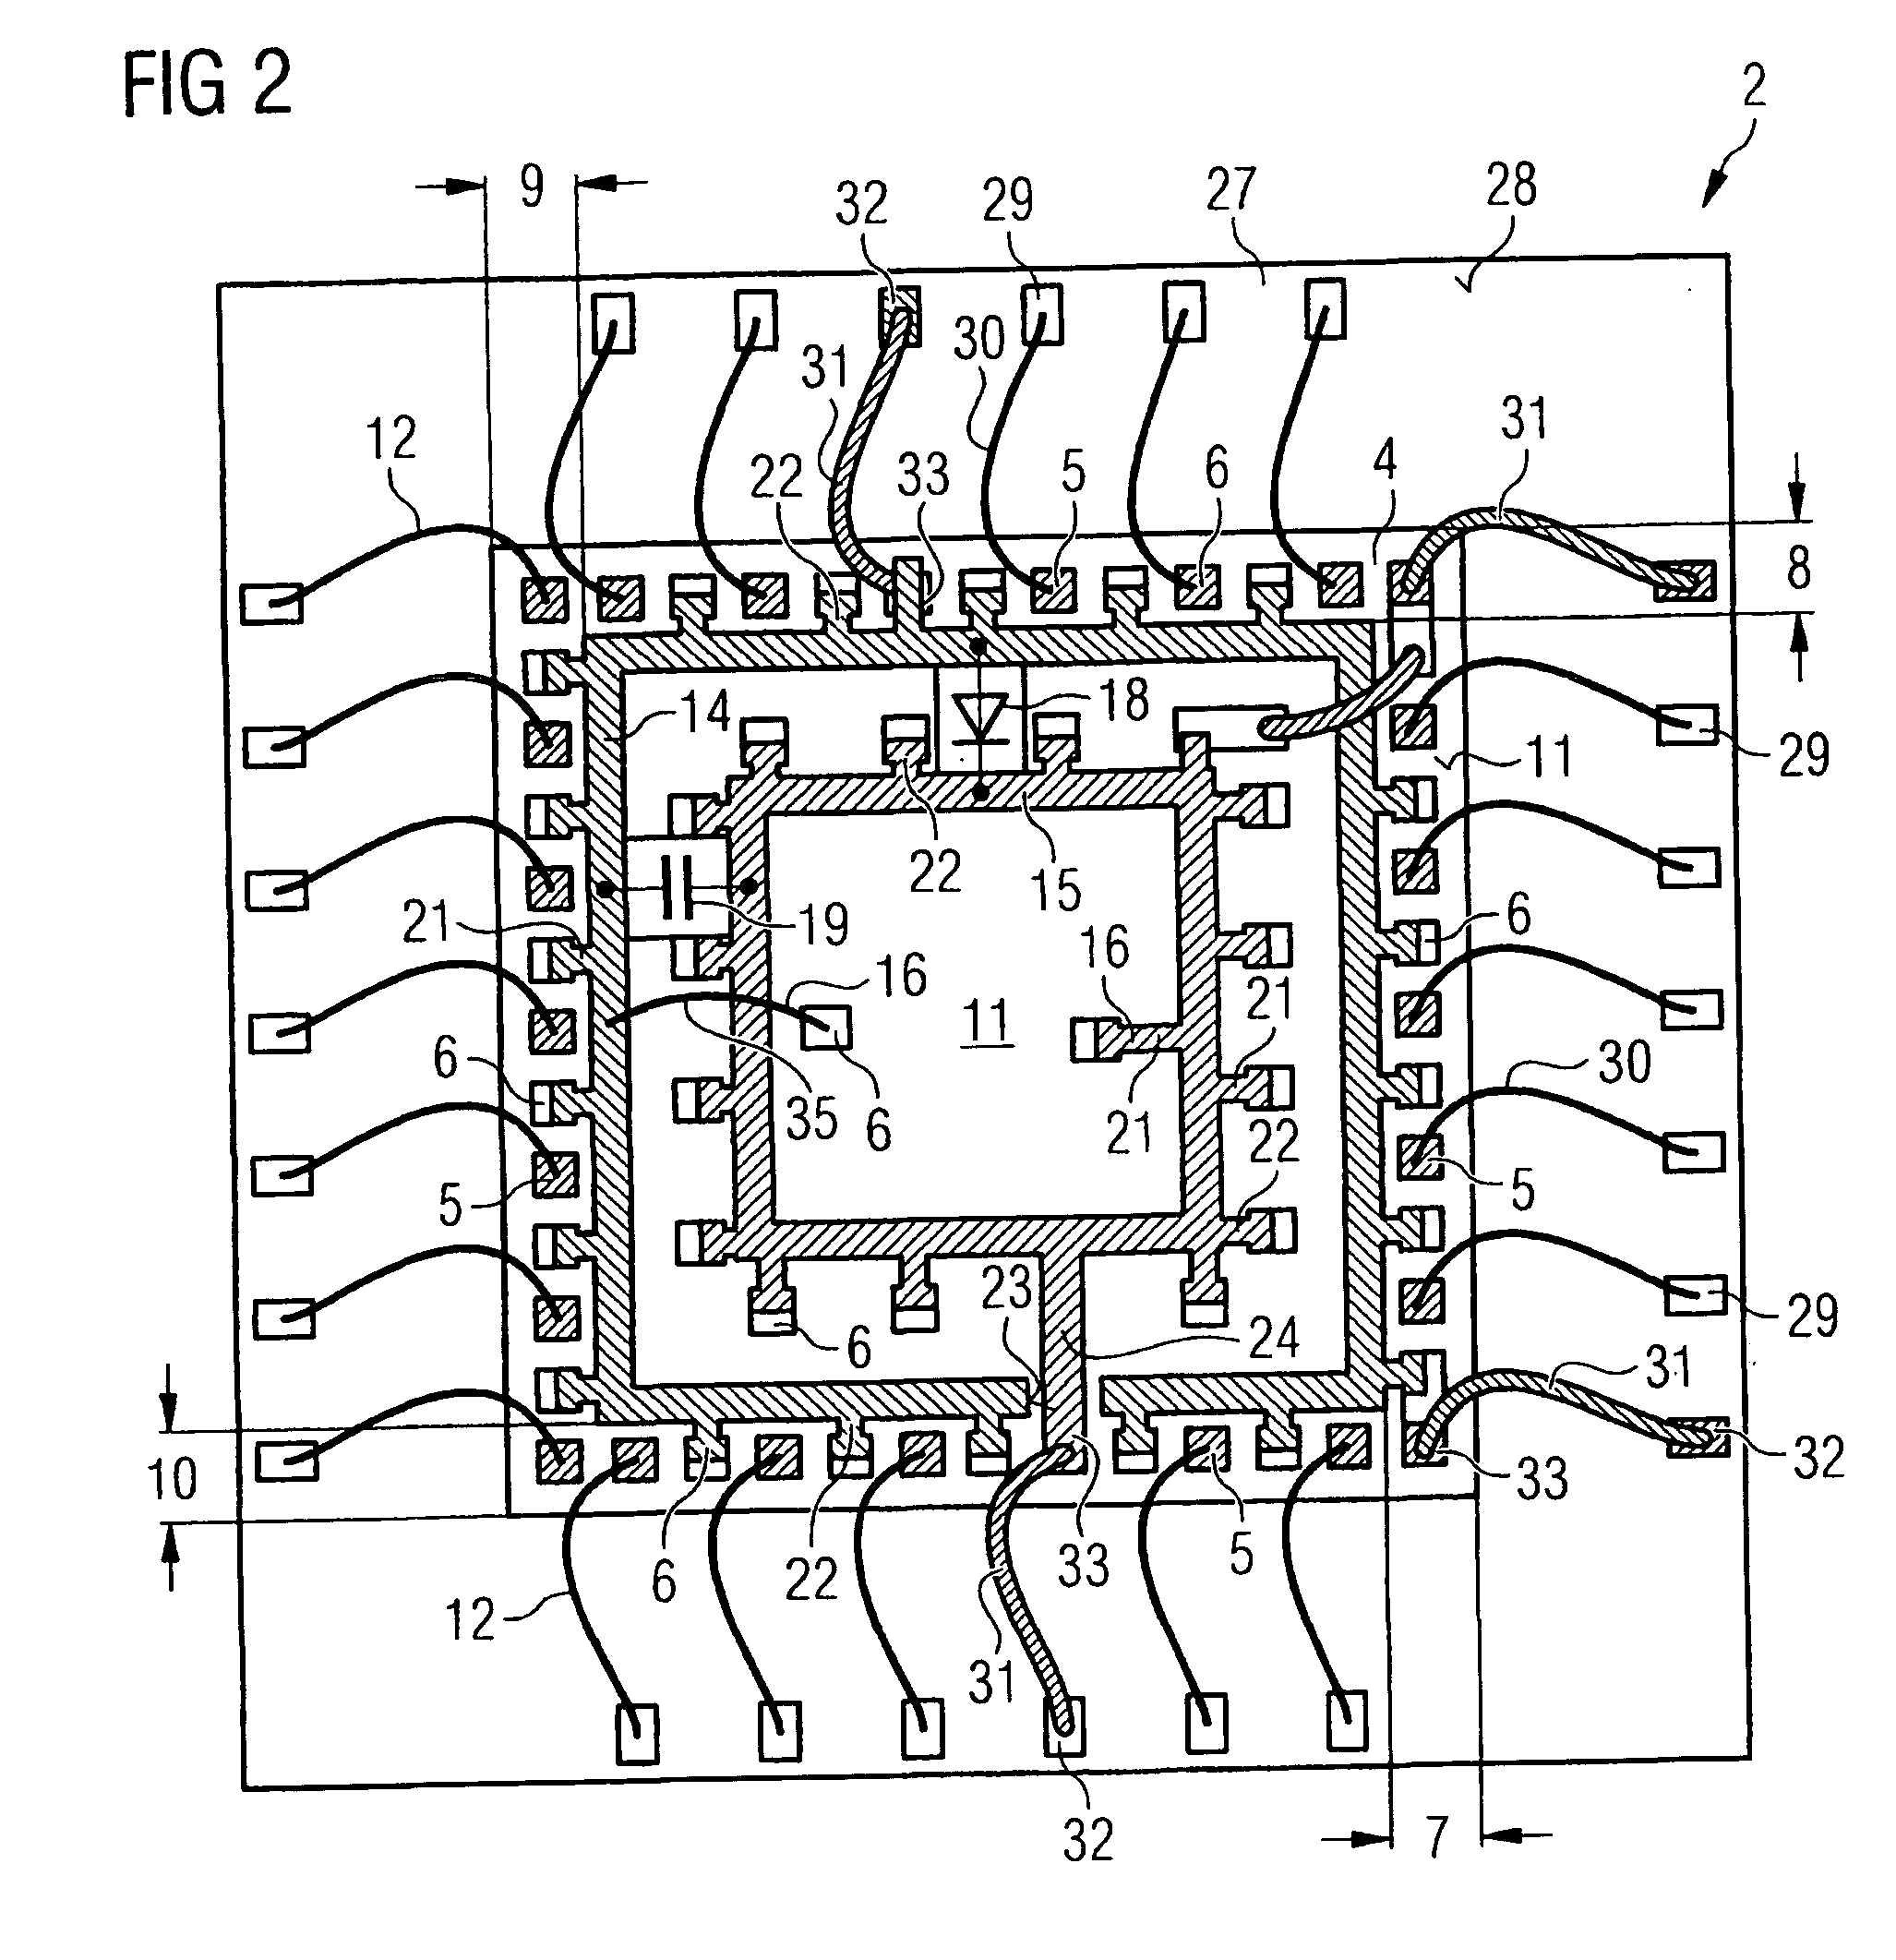 Semiconductor device including a semiconductor chip with signal contact areas and supply contact areas, and method for producing the semiconductor device